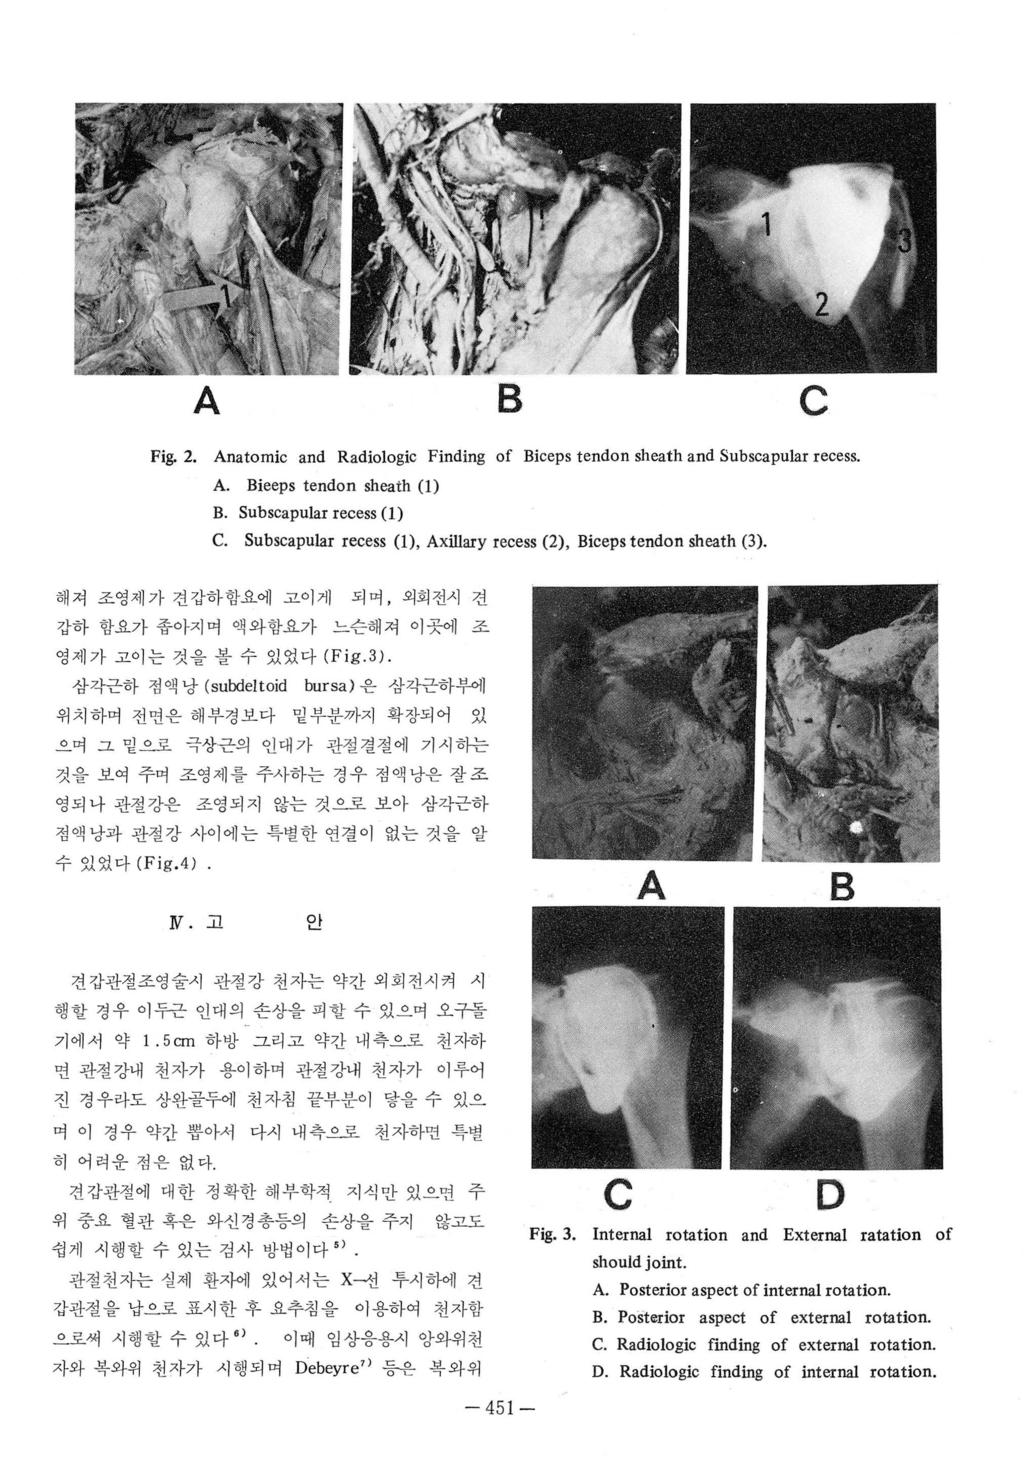 A B C Fig. 2. Anatomic and Radiologic Finding of Biceps tendon sheath and Subscapular recess. A. Bieeps tendon sheath (1) B. Subscapular recess (1) C.